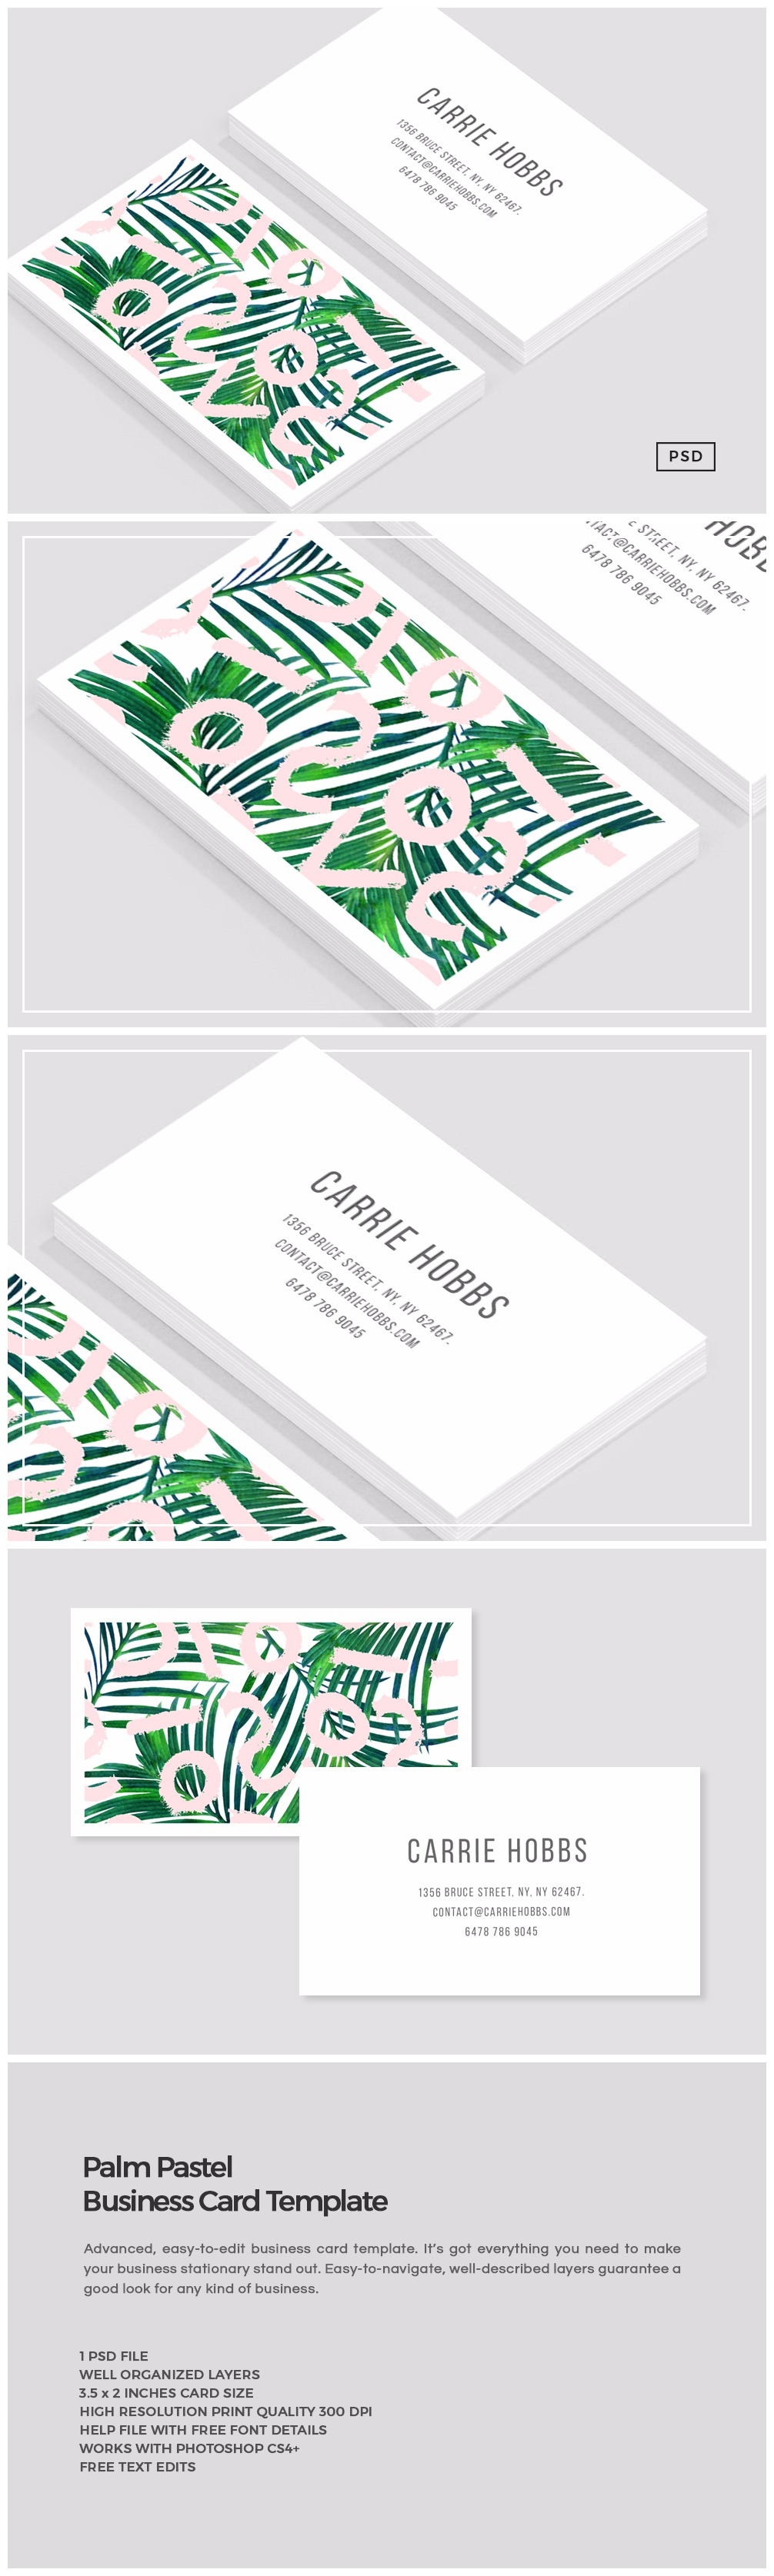 palm-pastel-business-card-template-business-card-templates-creative